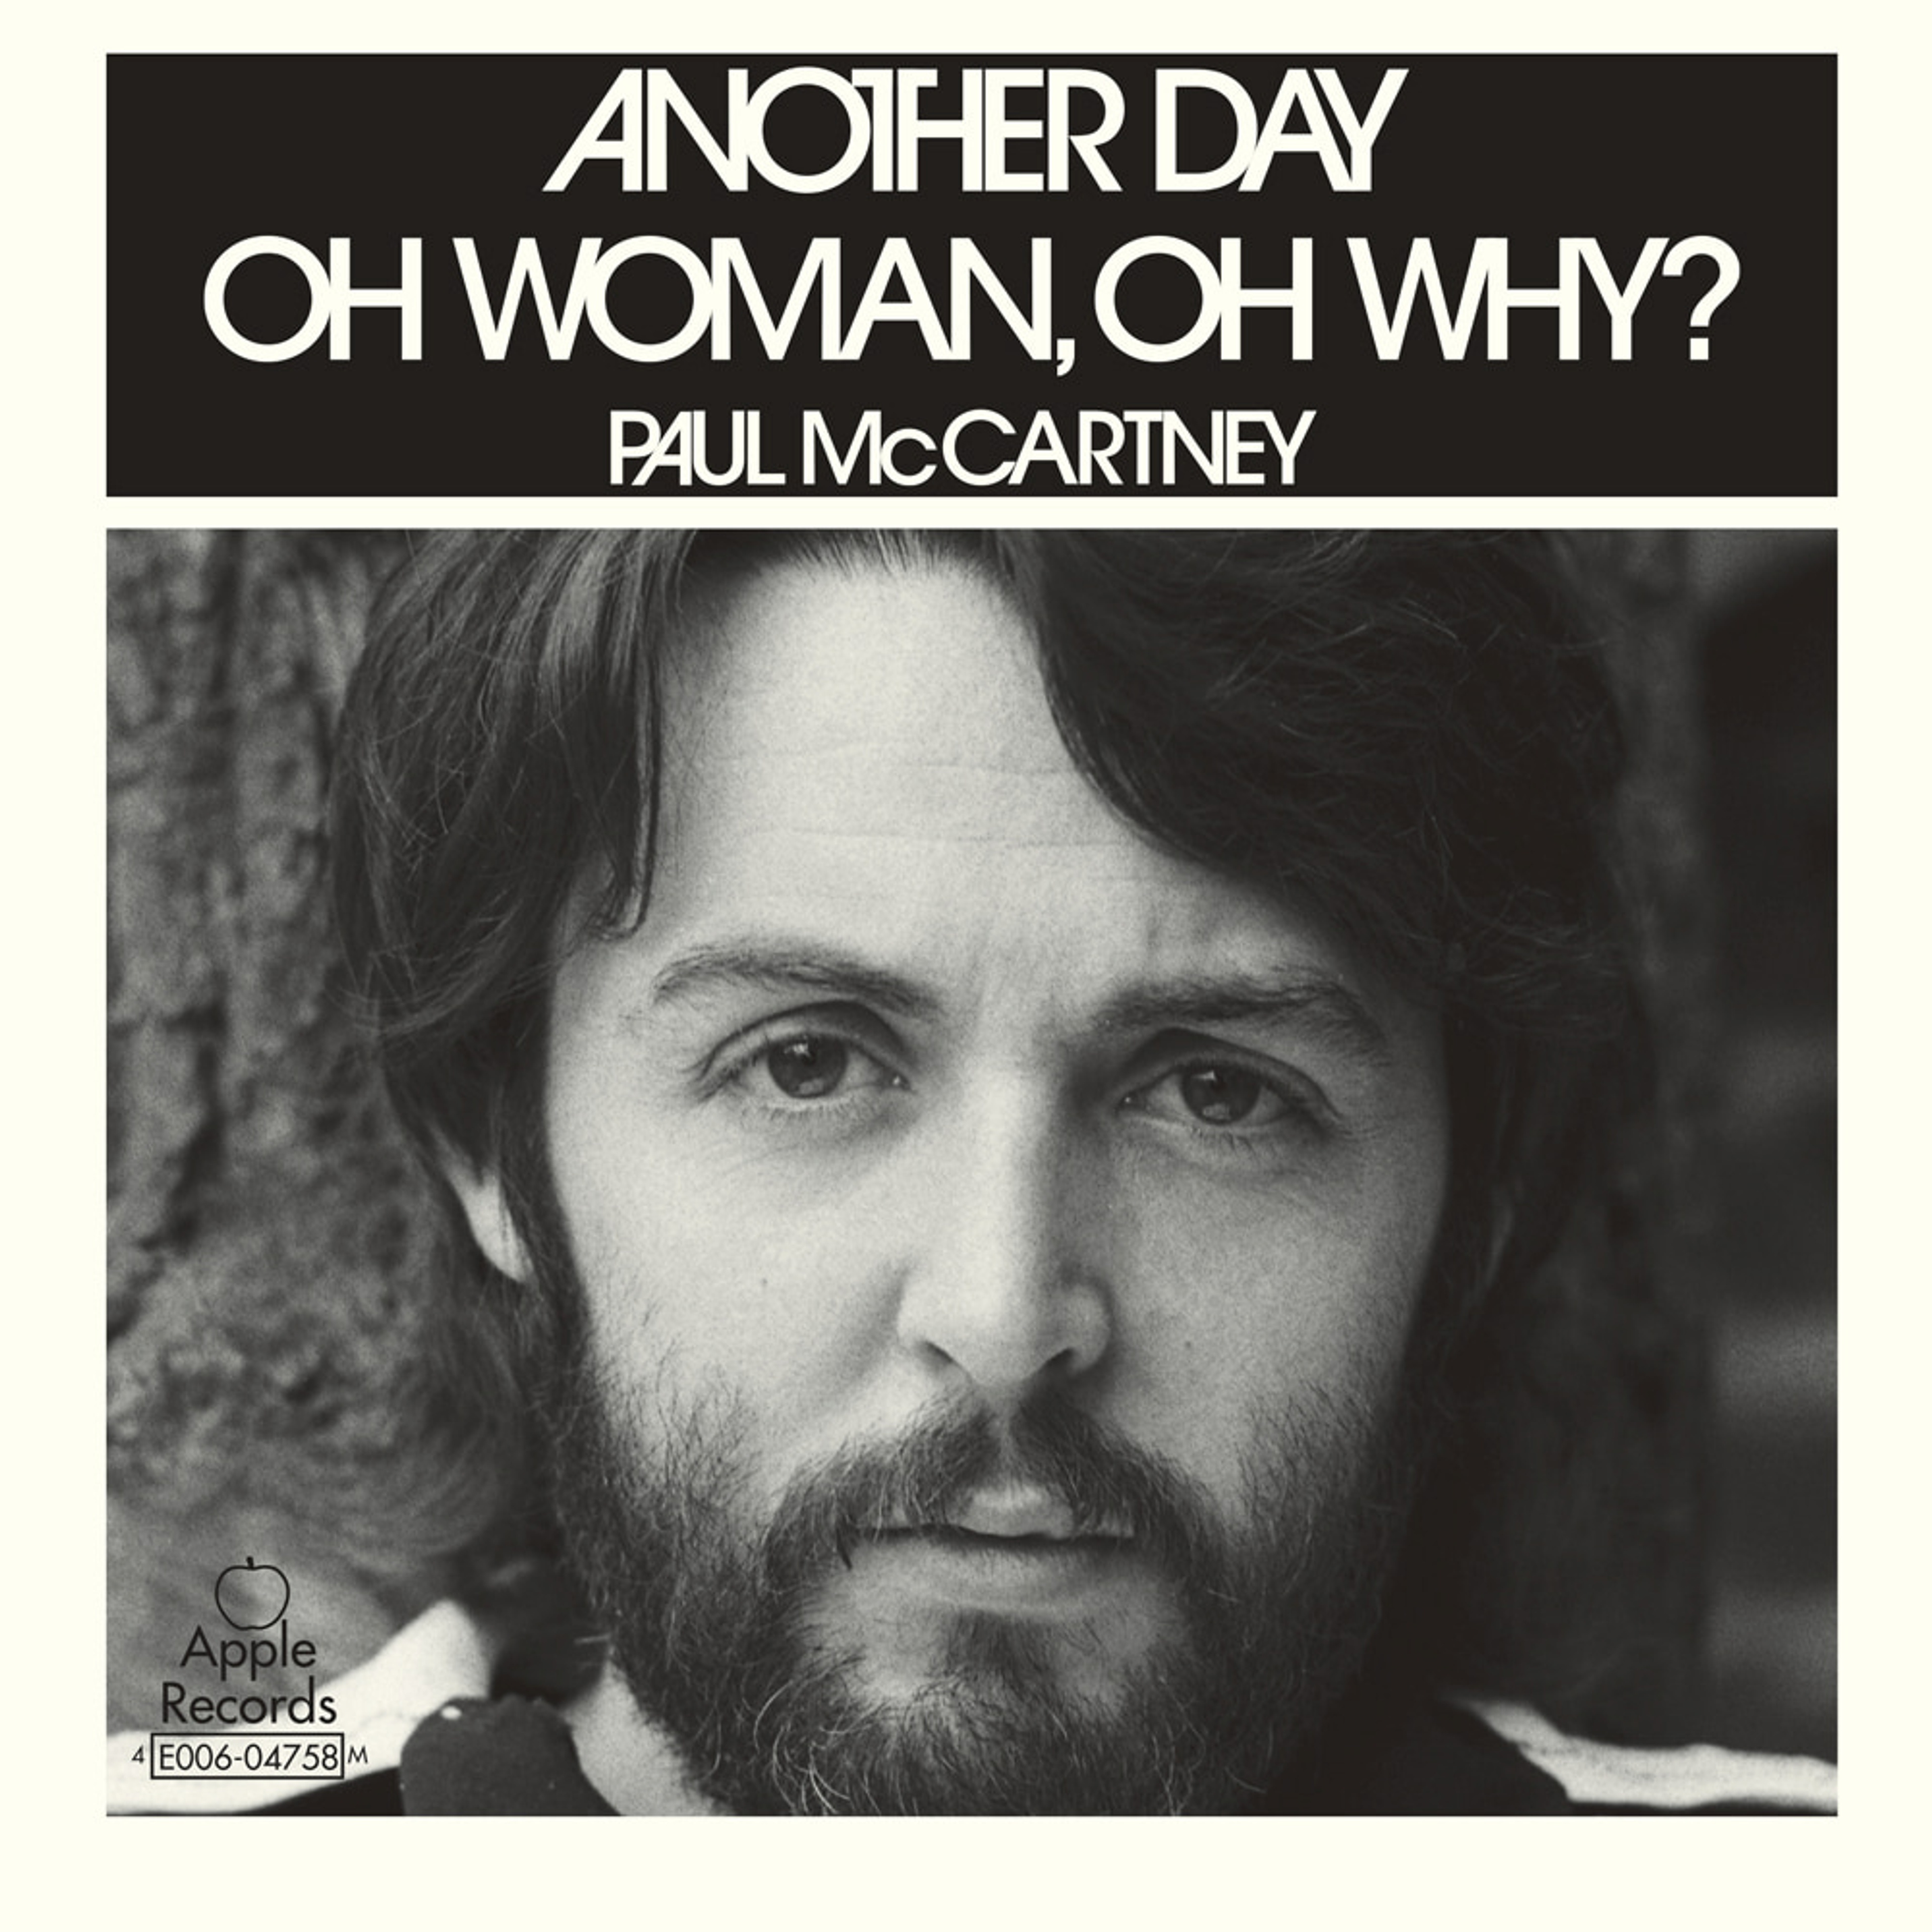 'Another Day/Oh Woman, Oh Why' Single artwork as featured in 'The 7" Singles Box'